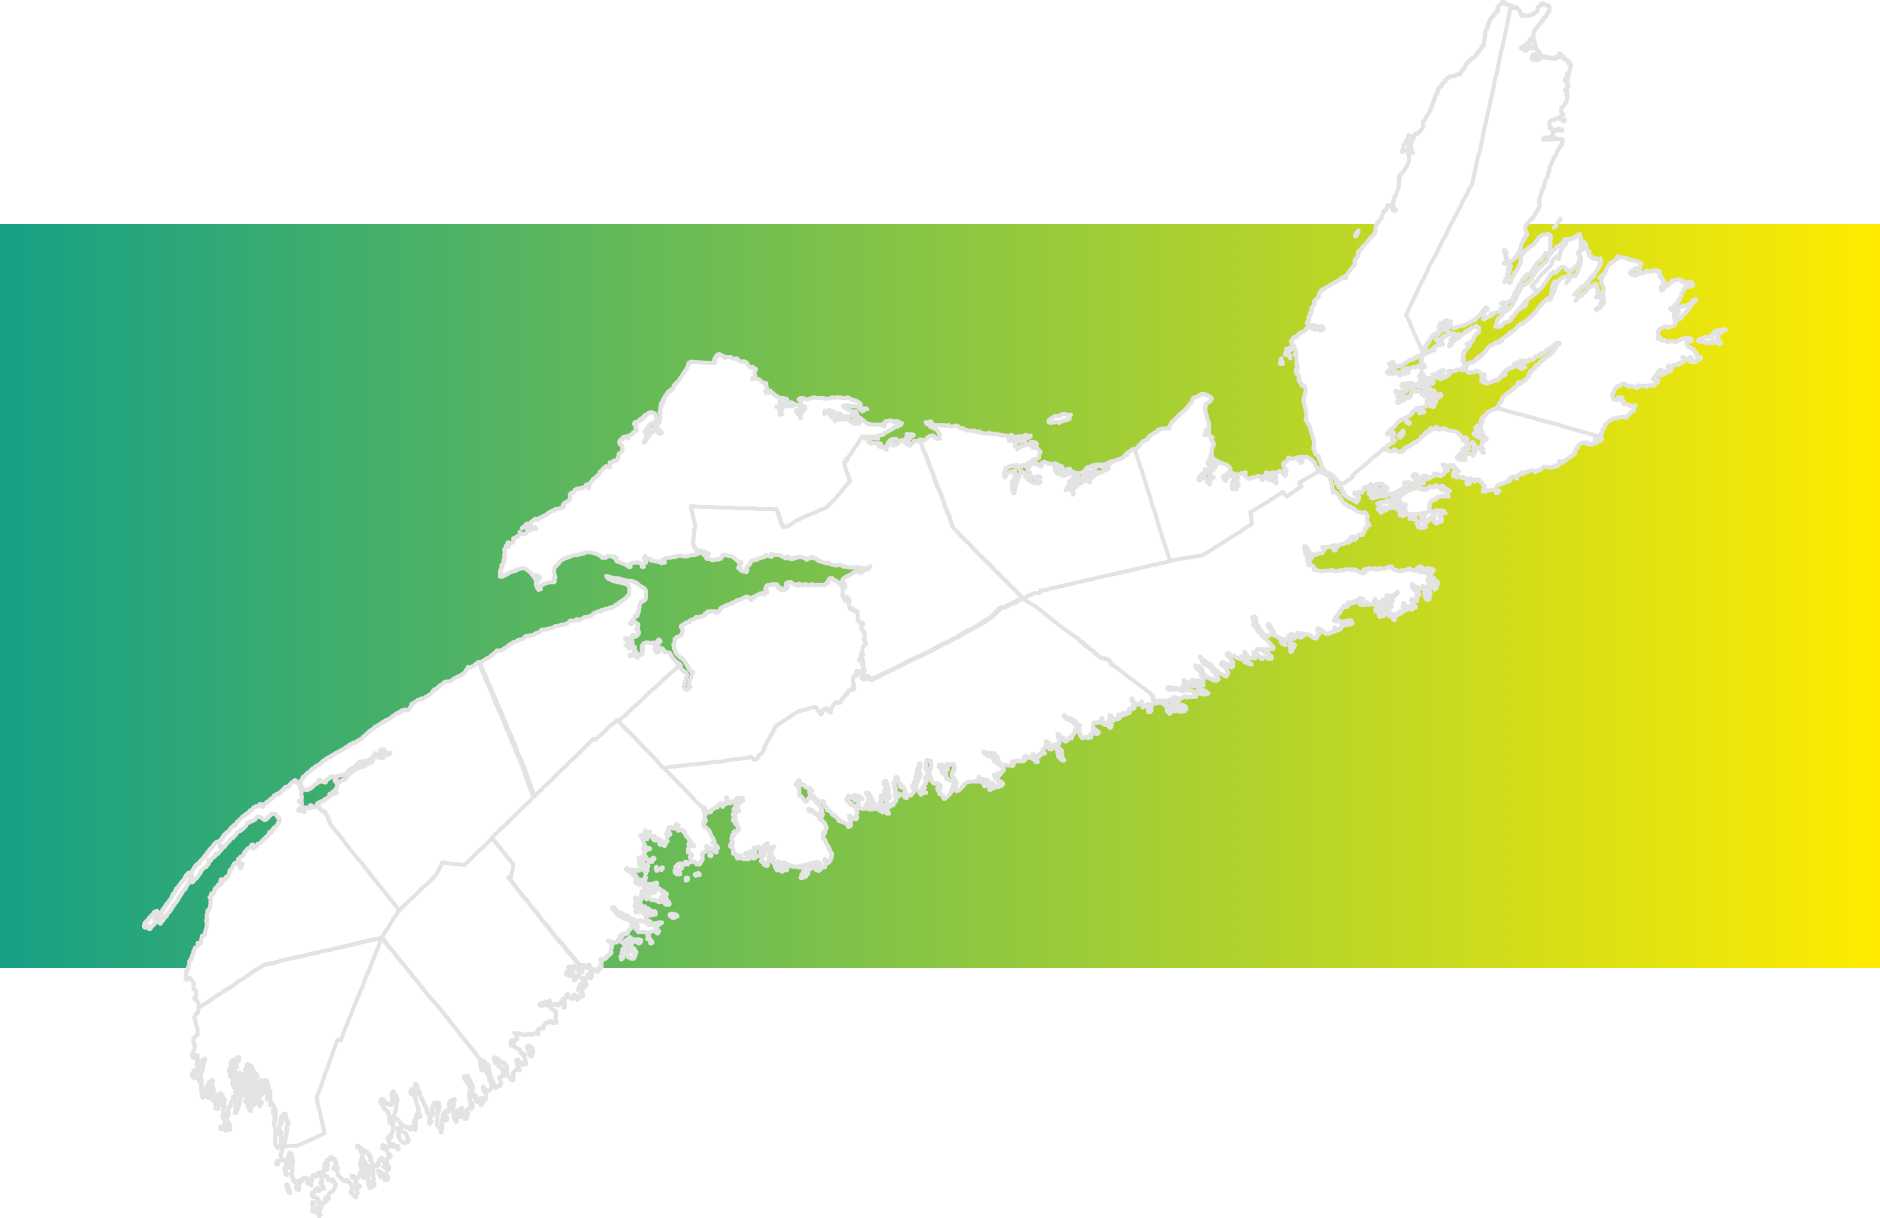 Flat vector Illustration of Nova Scotia in white with a light grey outline highlighting each region. The province is overlayed on a green to yellow gradient background